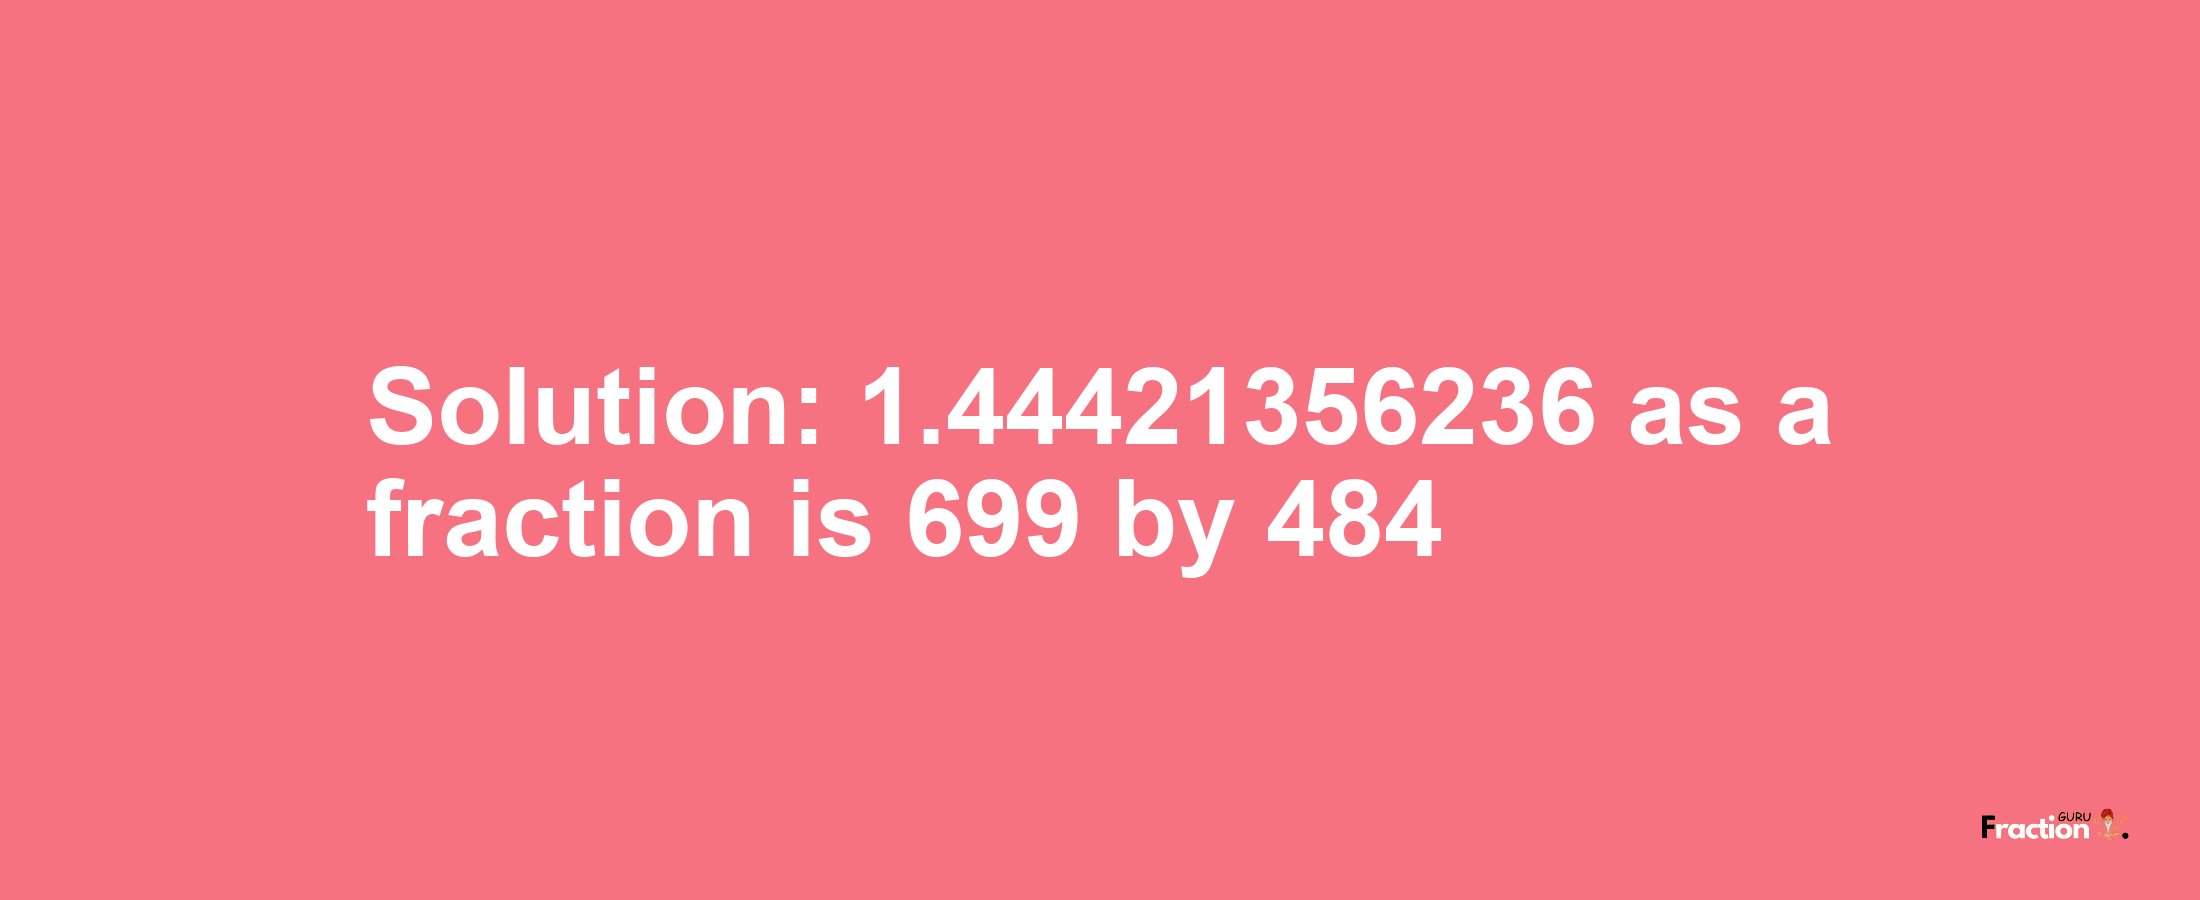 Solution:1.44421356236 as a fraction is 699/484